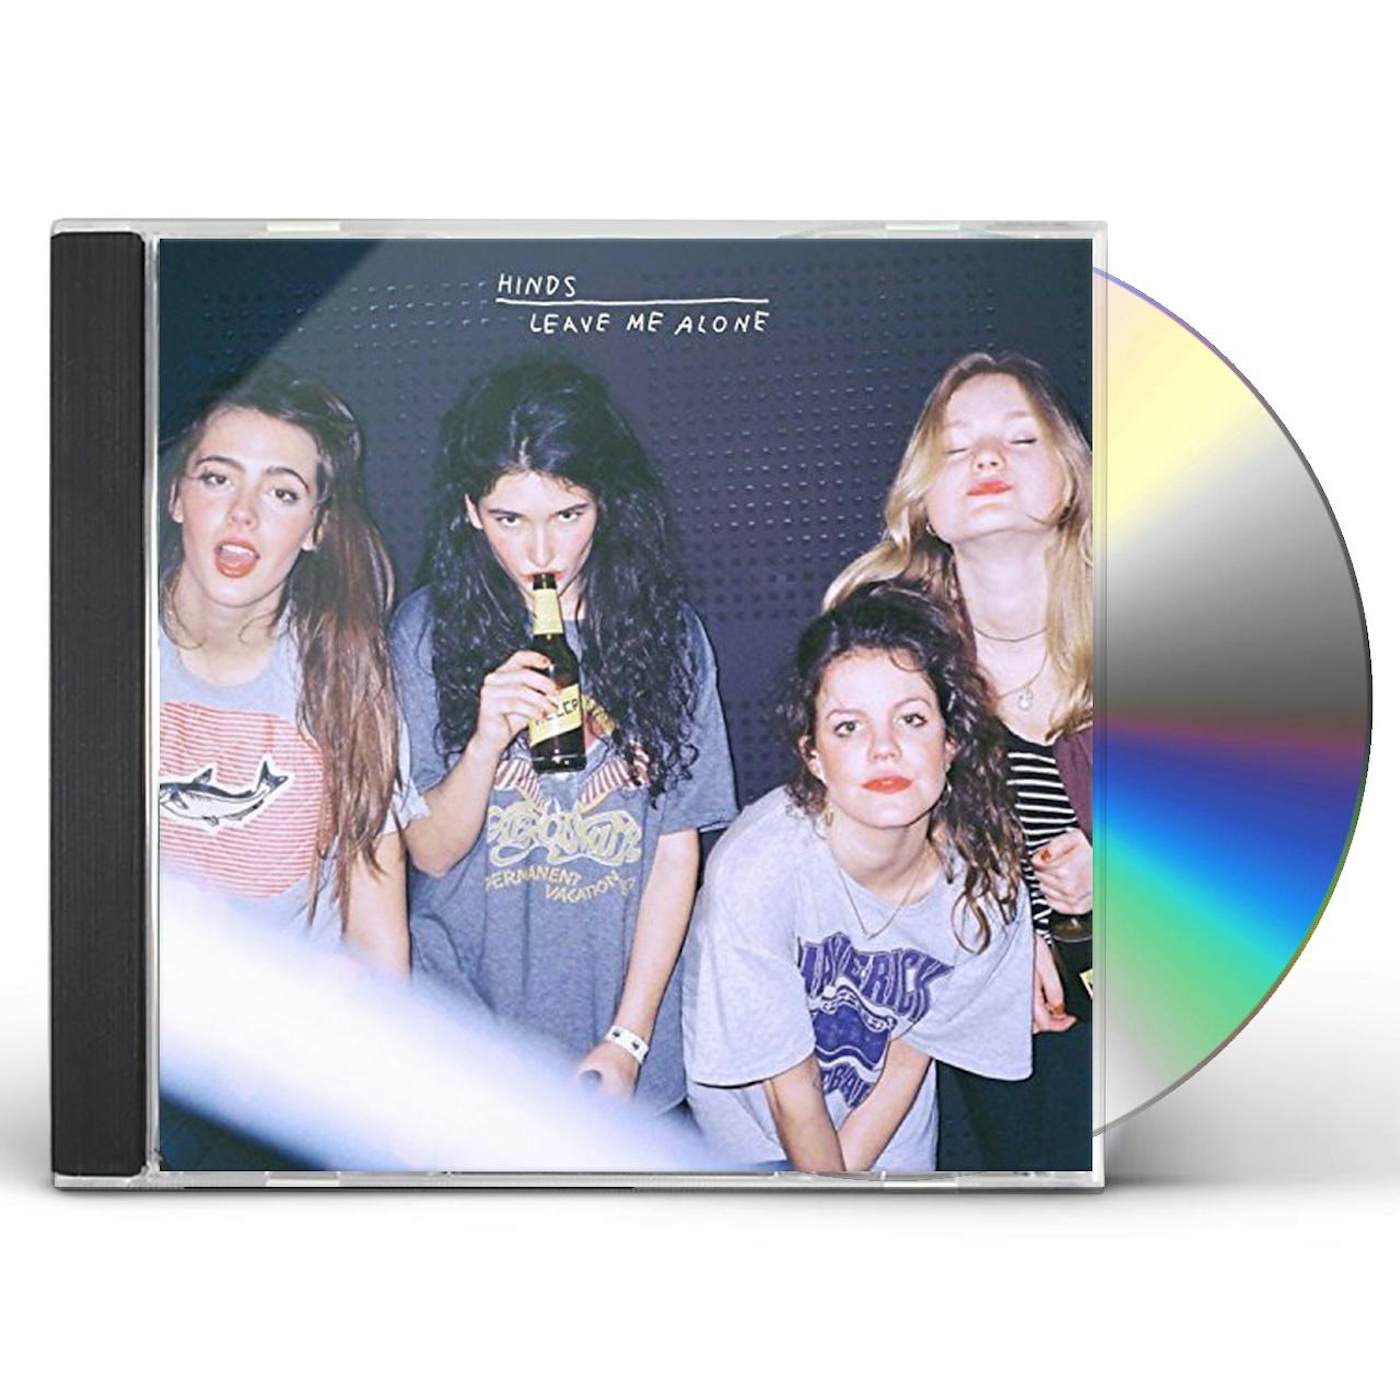 Hinds LEAVE ME ALONE CD